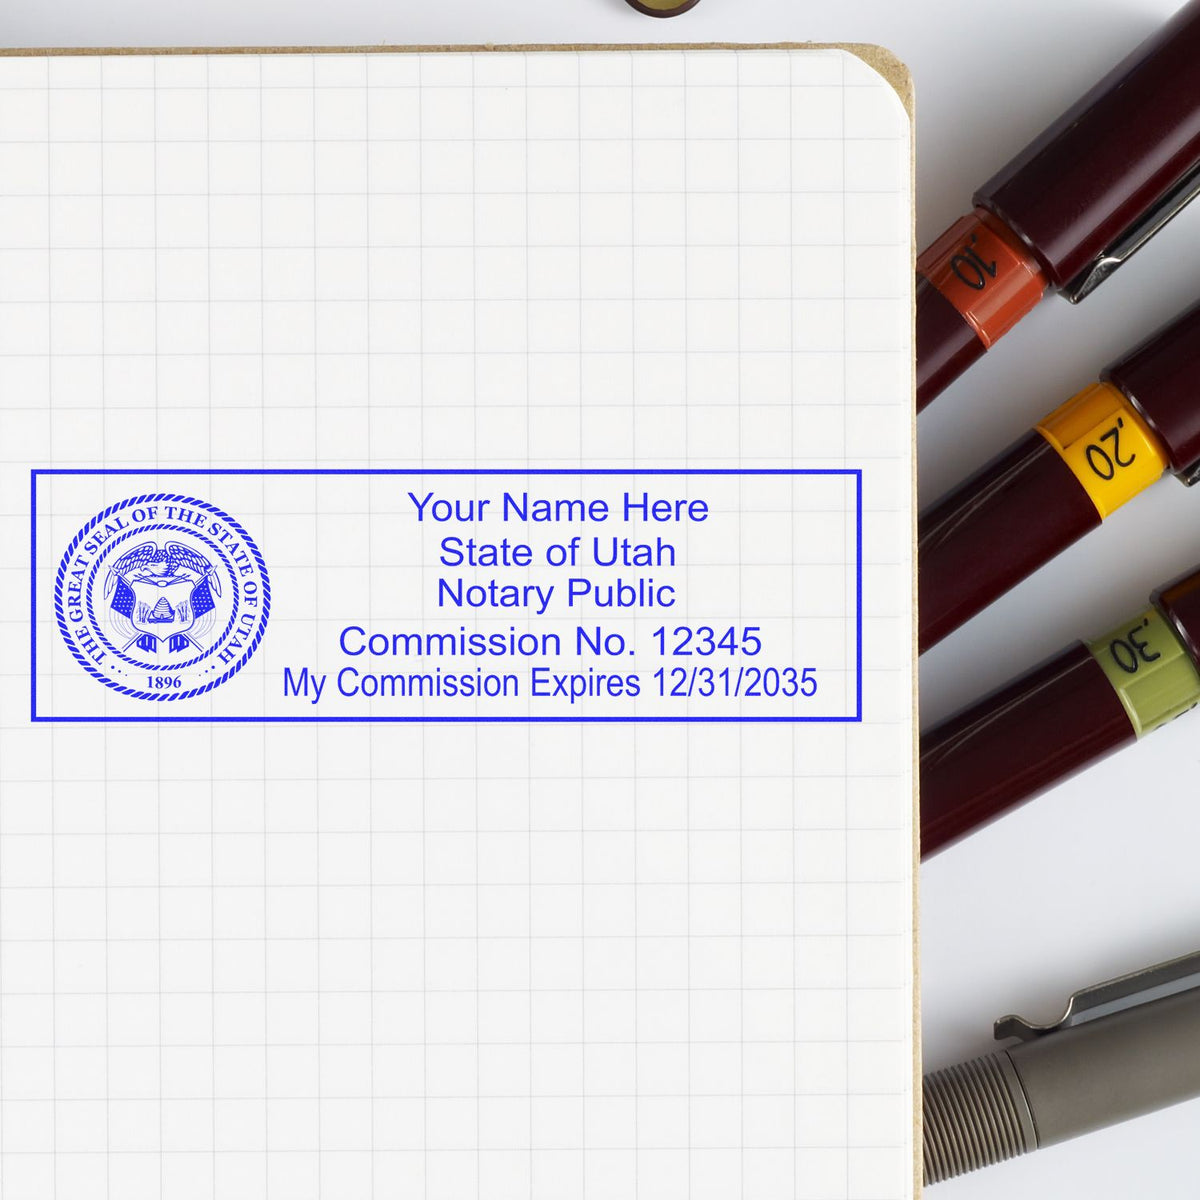 An alternative view of the Heavy-Duty Utah Rectangular Notary Stamp stamped on a sheet of paper showing the image in use